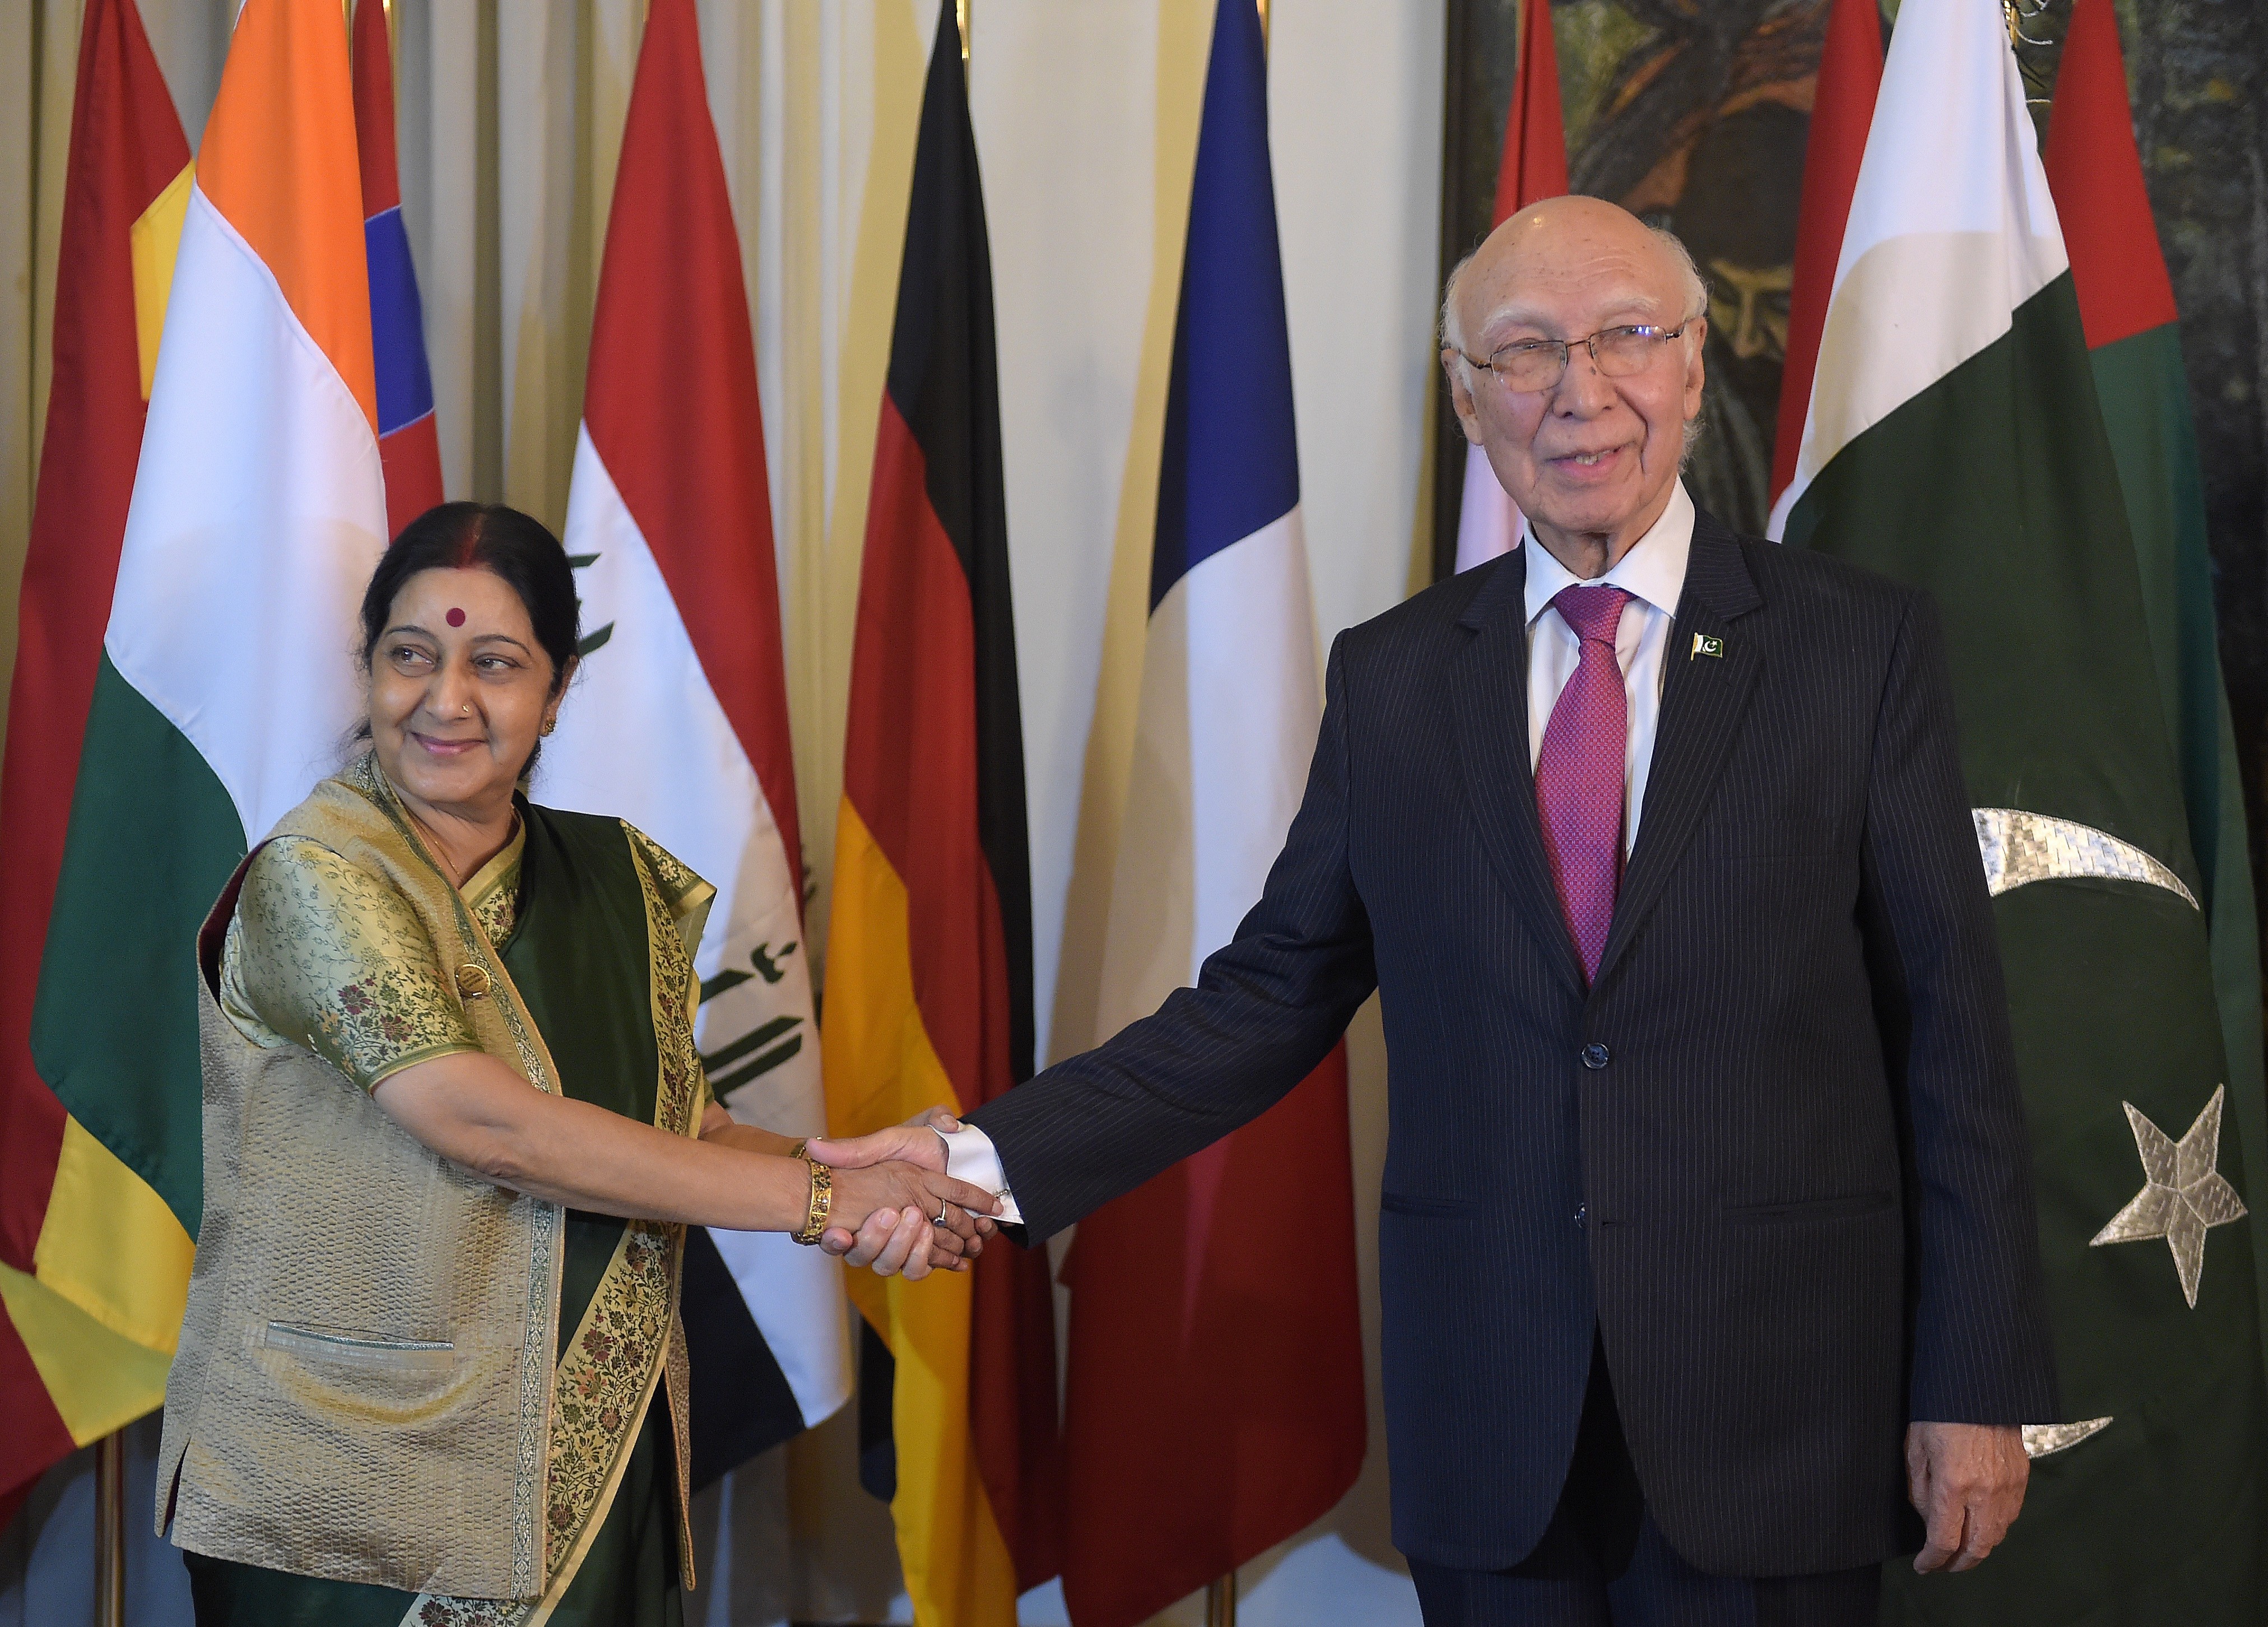 Pakistan's prime-ministerial adviser on foreign affairs Sartaj Aziz, right, shakes hands with Indian Foreign Minister Sushma Swaraj in Islamabad on Dec. 9, 2015 (Aamir Qureshi—AFP/Getty Images)